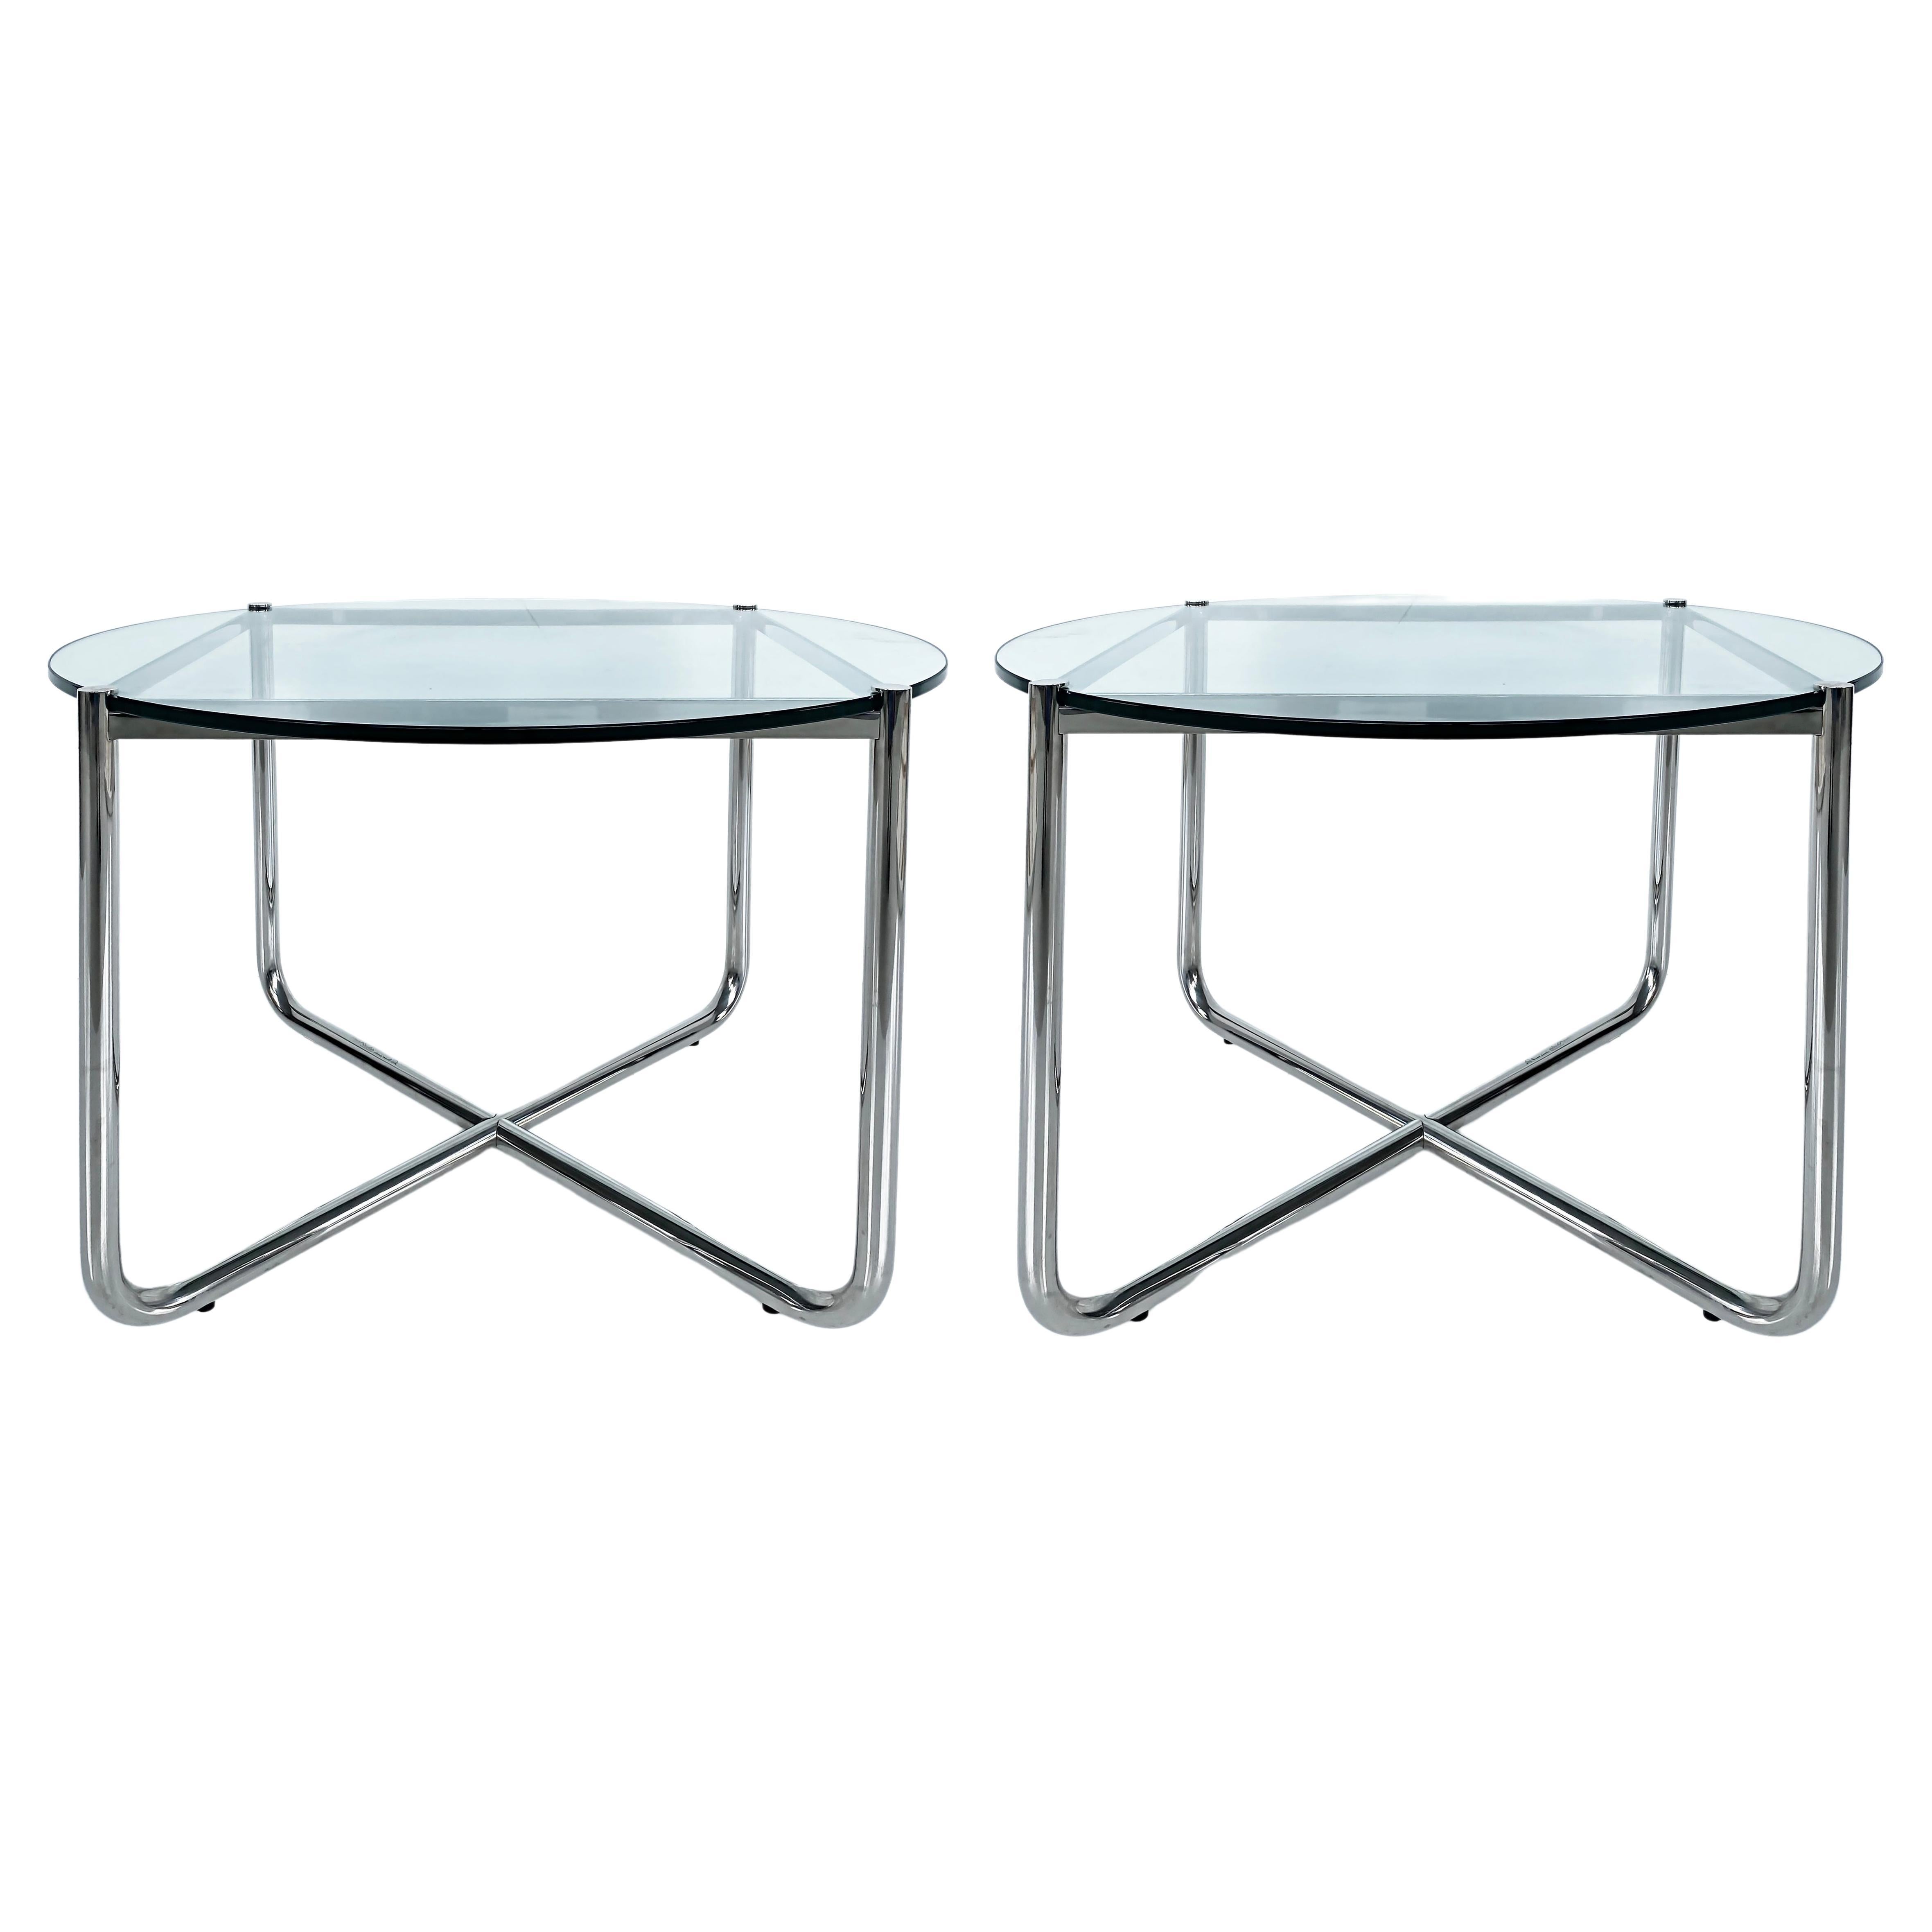 Knoll Studio Mies Van De Rohe MR Side Tables in Stainless with Glass Tops, Pair